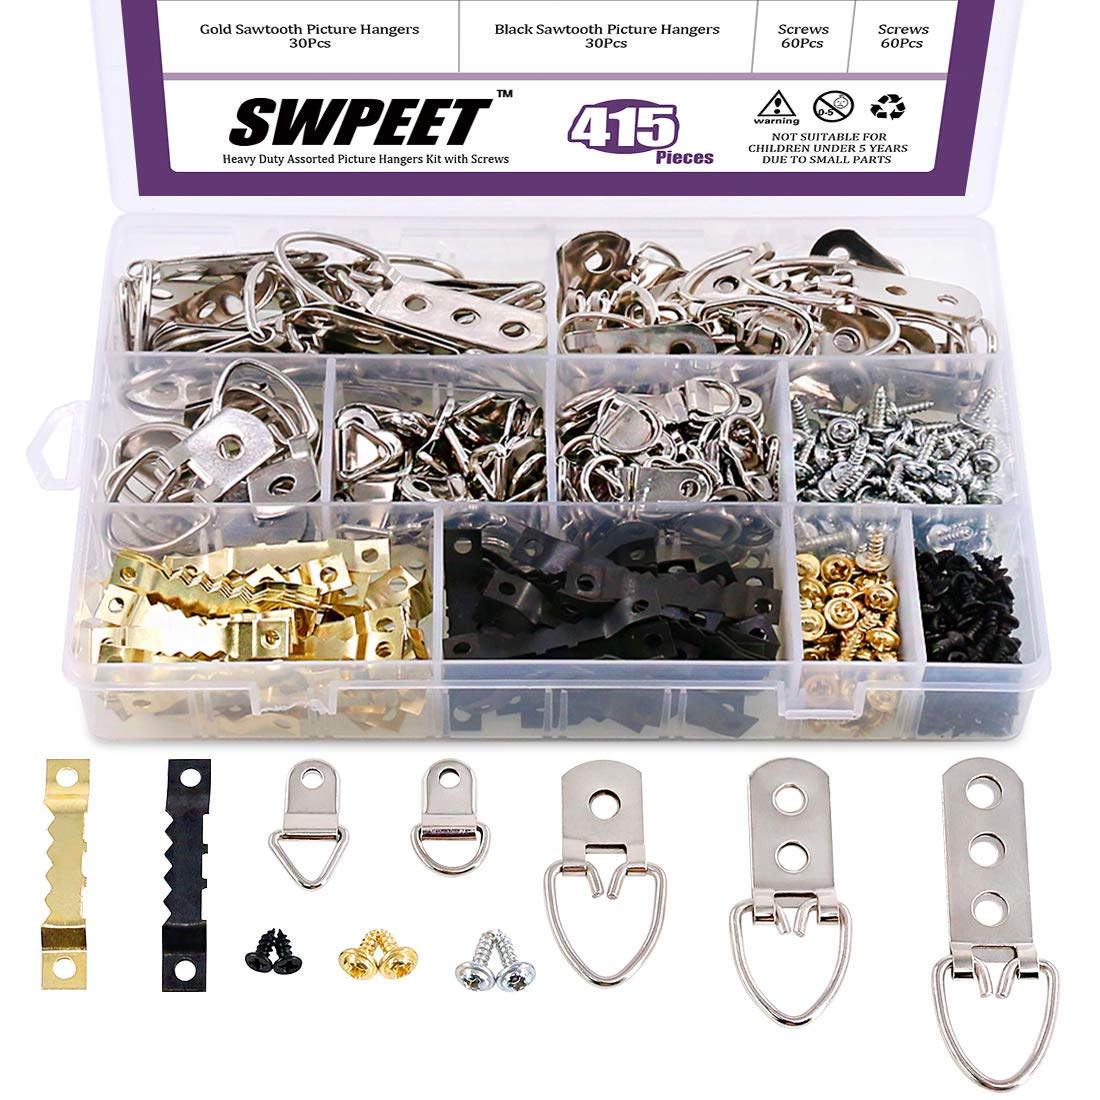 Swpeet 415Pcs Picture Hangers Kit with Screws, Heavy Duty Assorted Picture  Hangers Assortment Kit for Picture Hanging Solutions with Transparent Box -  7 Models